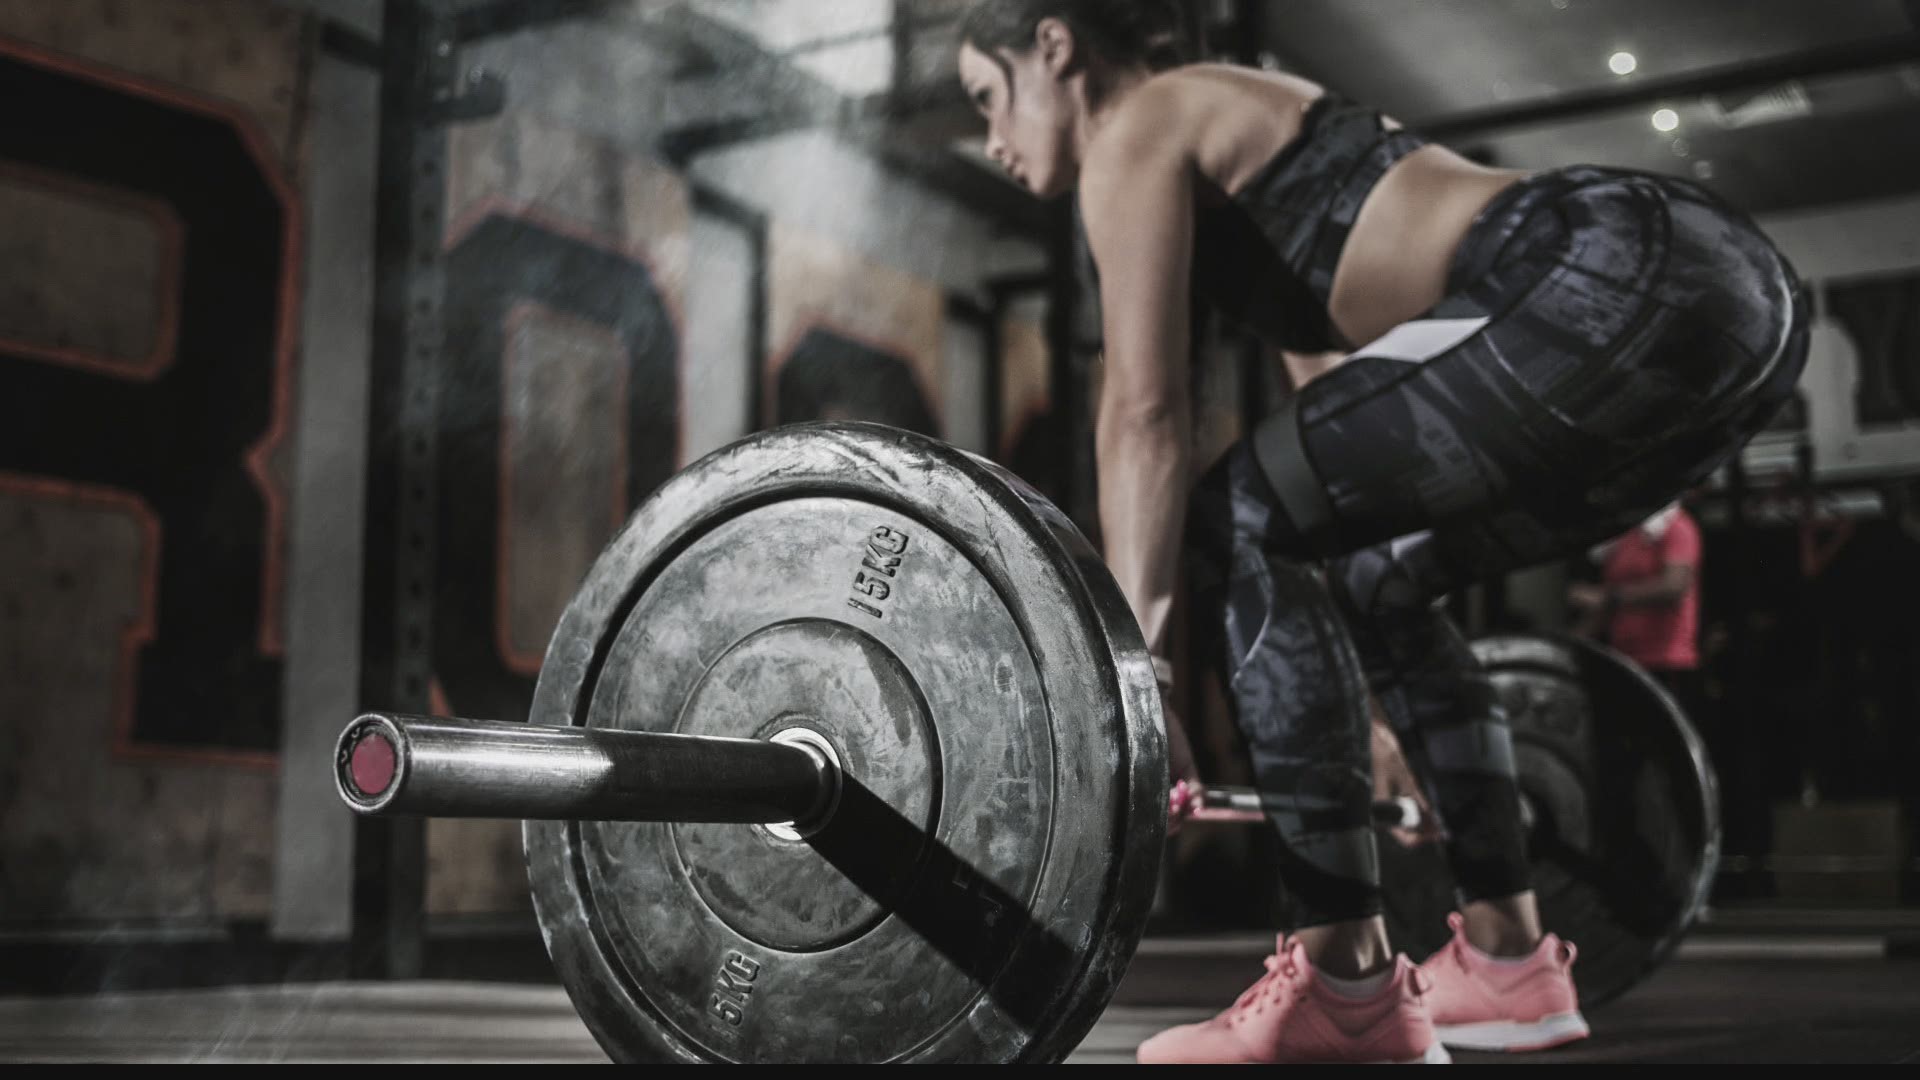 If you've been lifting weights but have not seen results, it might be time to make some adjustments.